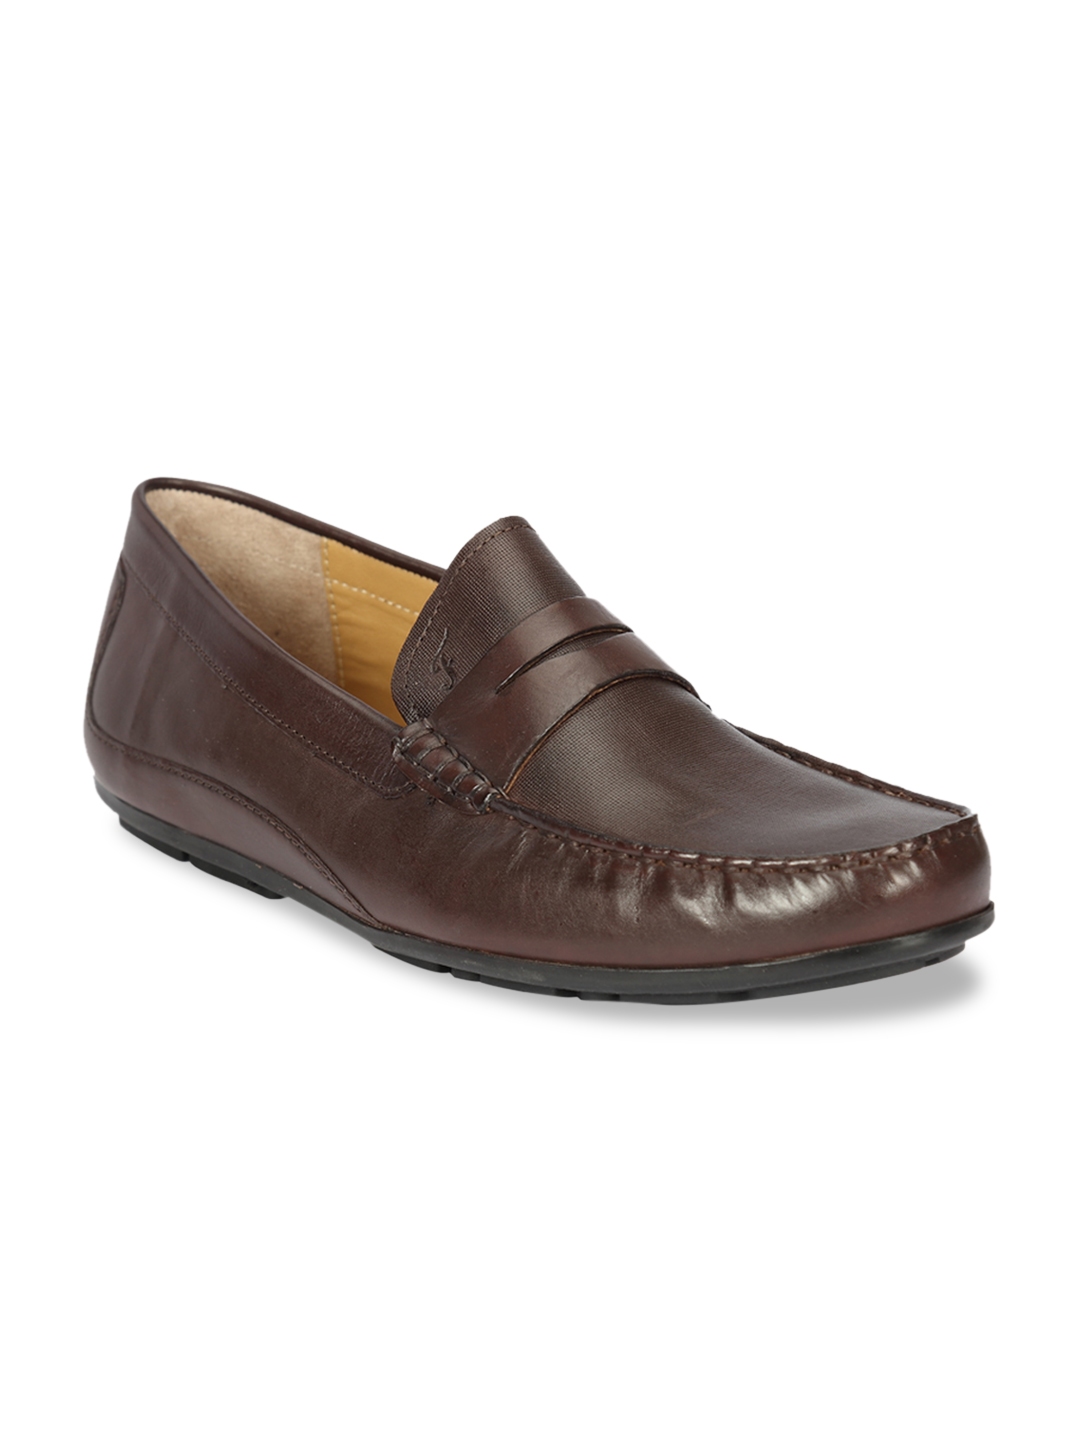 Buy Florsheim Men Brown Loafers - Casual Shoes for Men 11984624 | Myntra